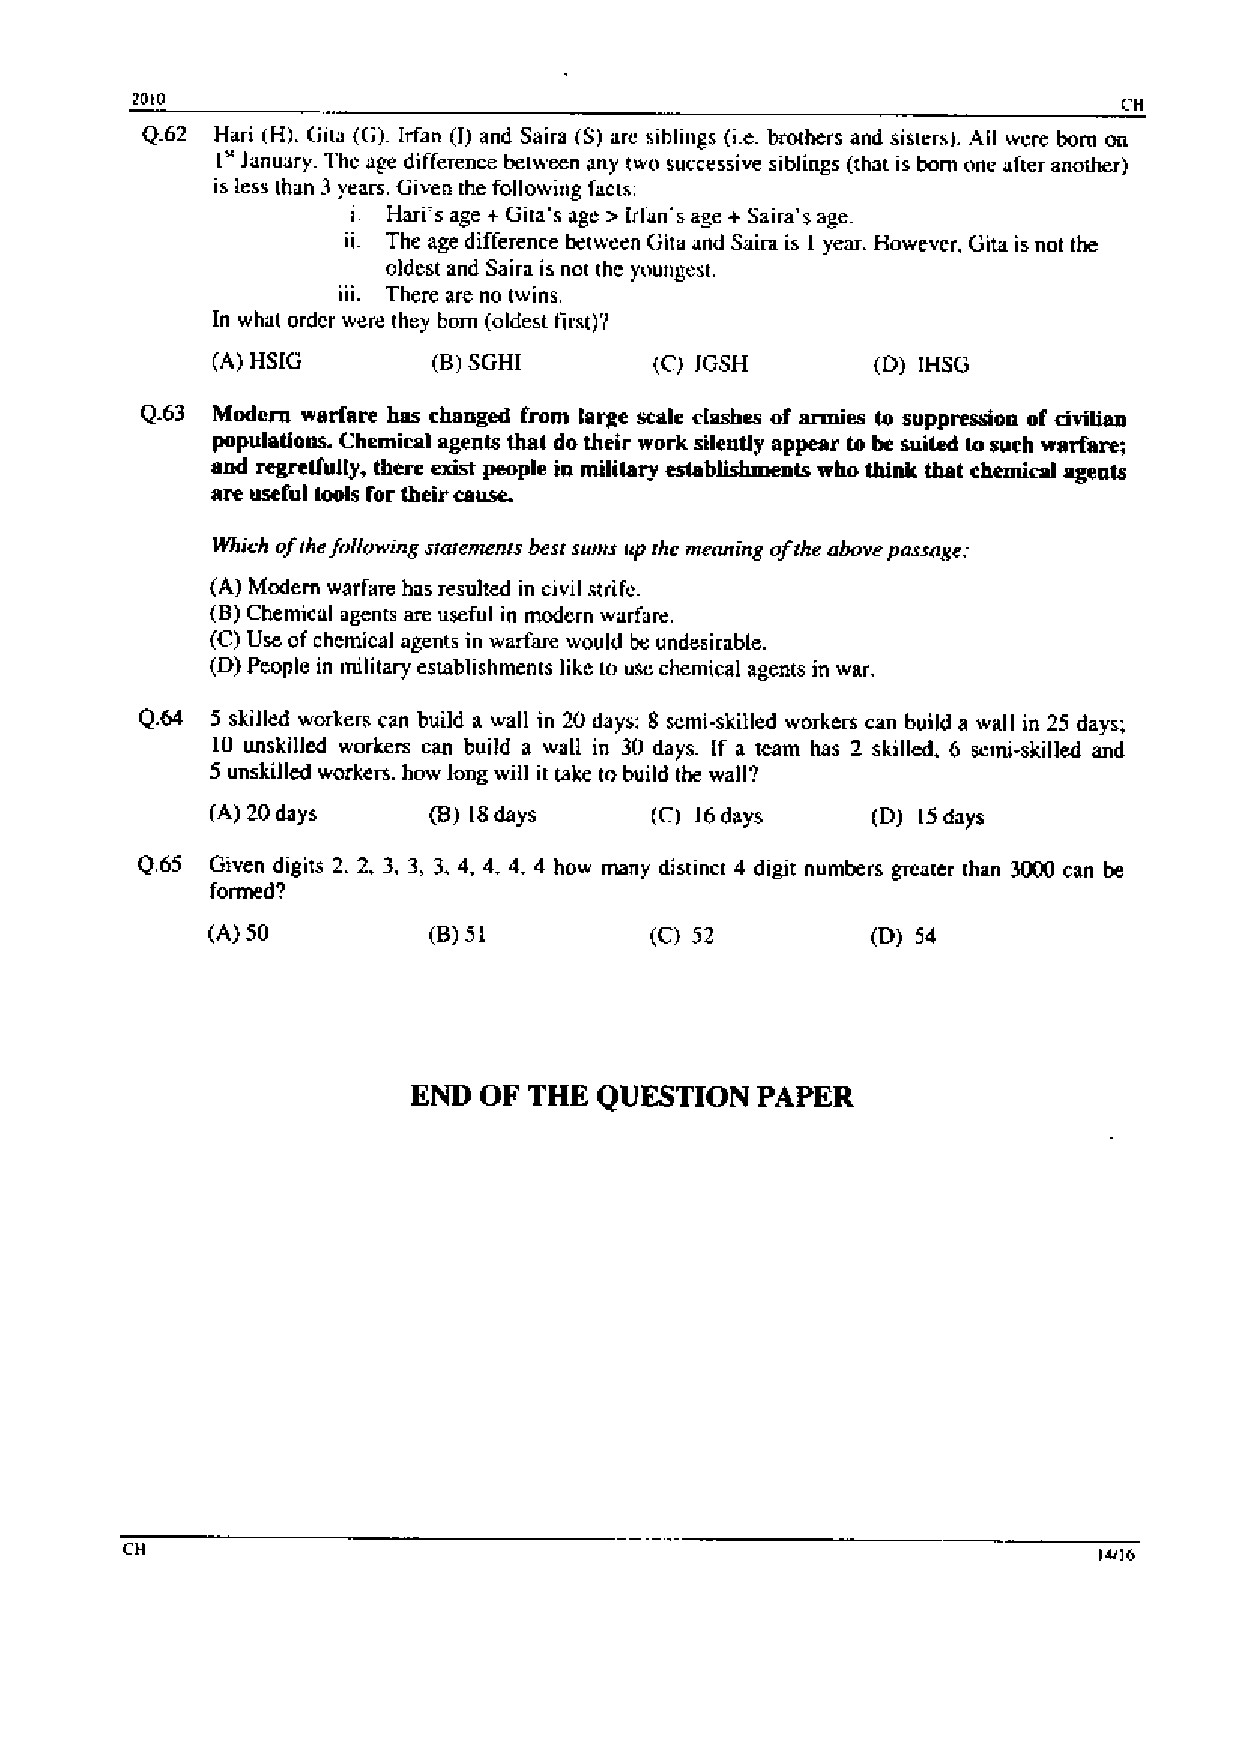 GATE Exam Question Paper 2010 Chemical Engineering 14